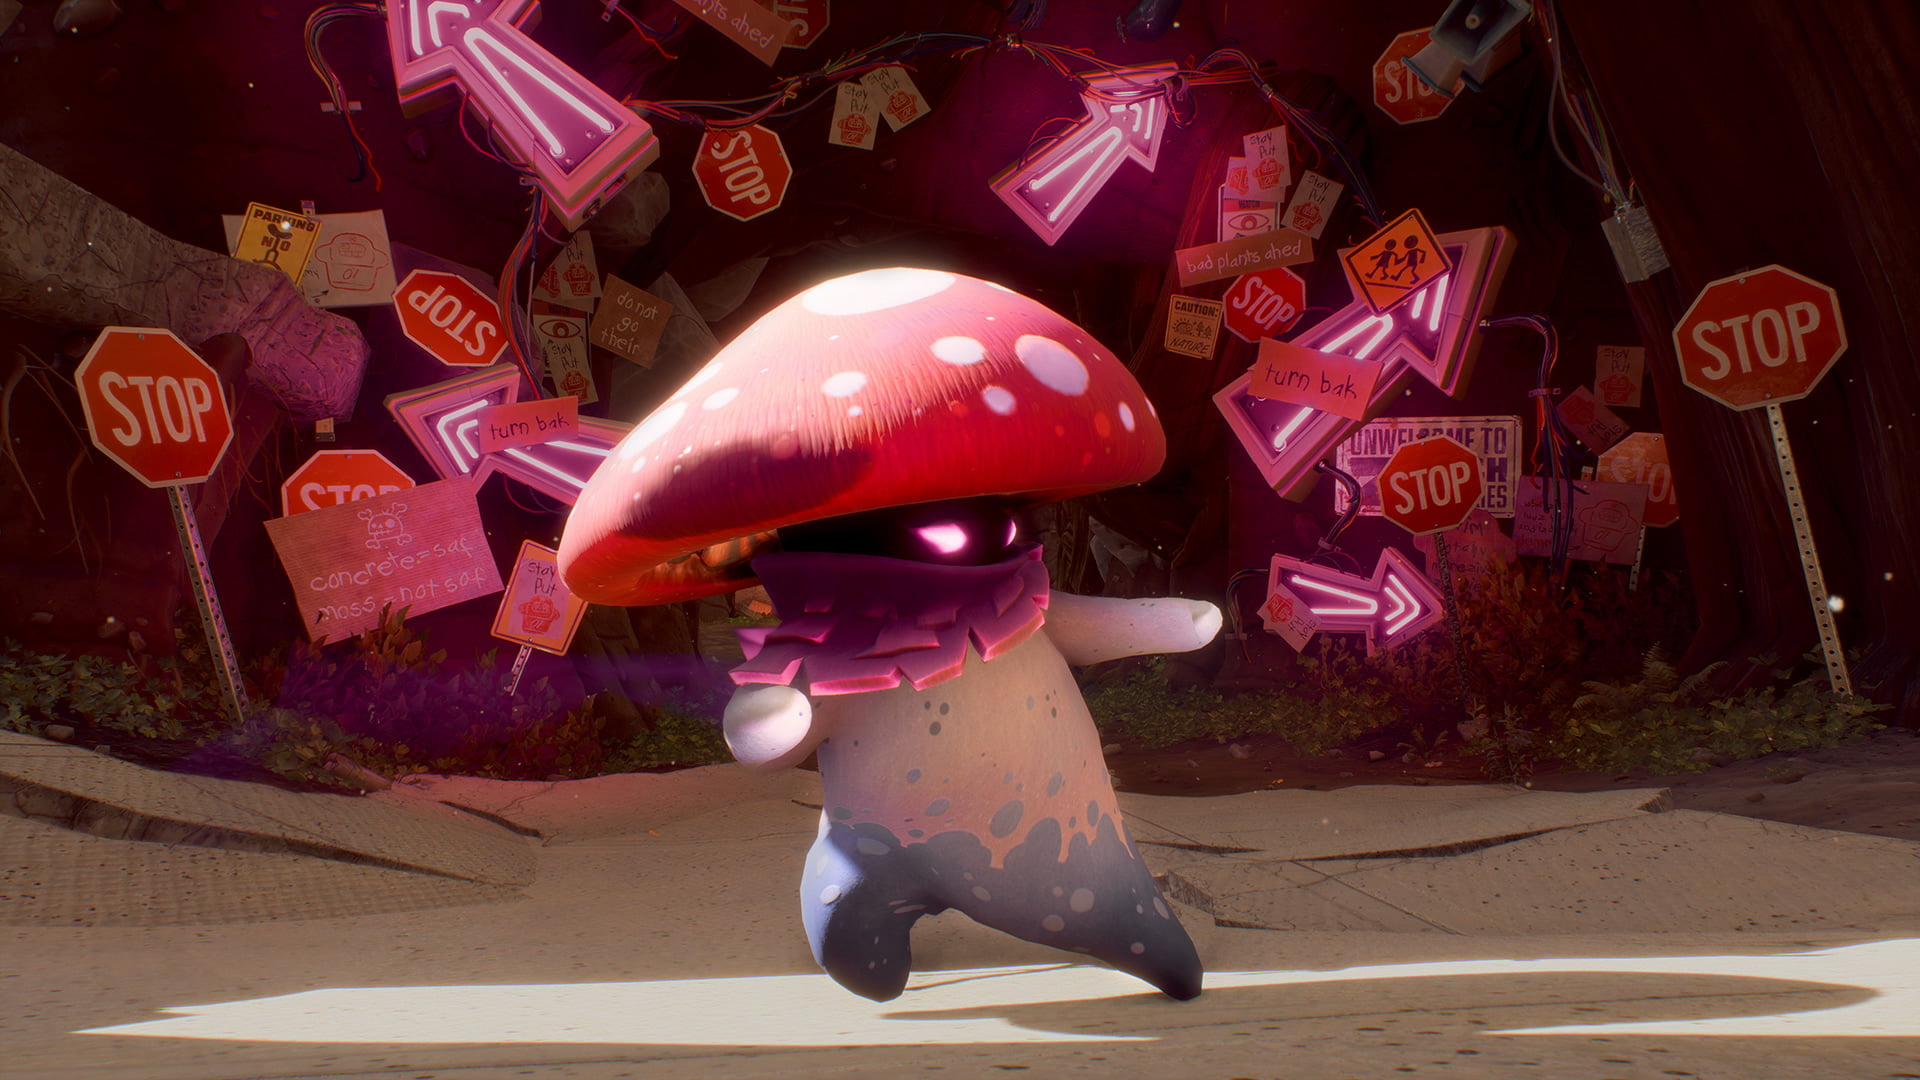 Plants vs. Zombies, red, Amanita muscaria, signs, neon sign